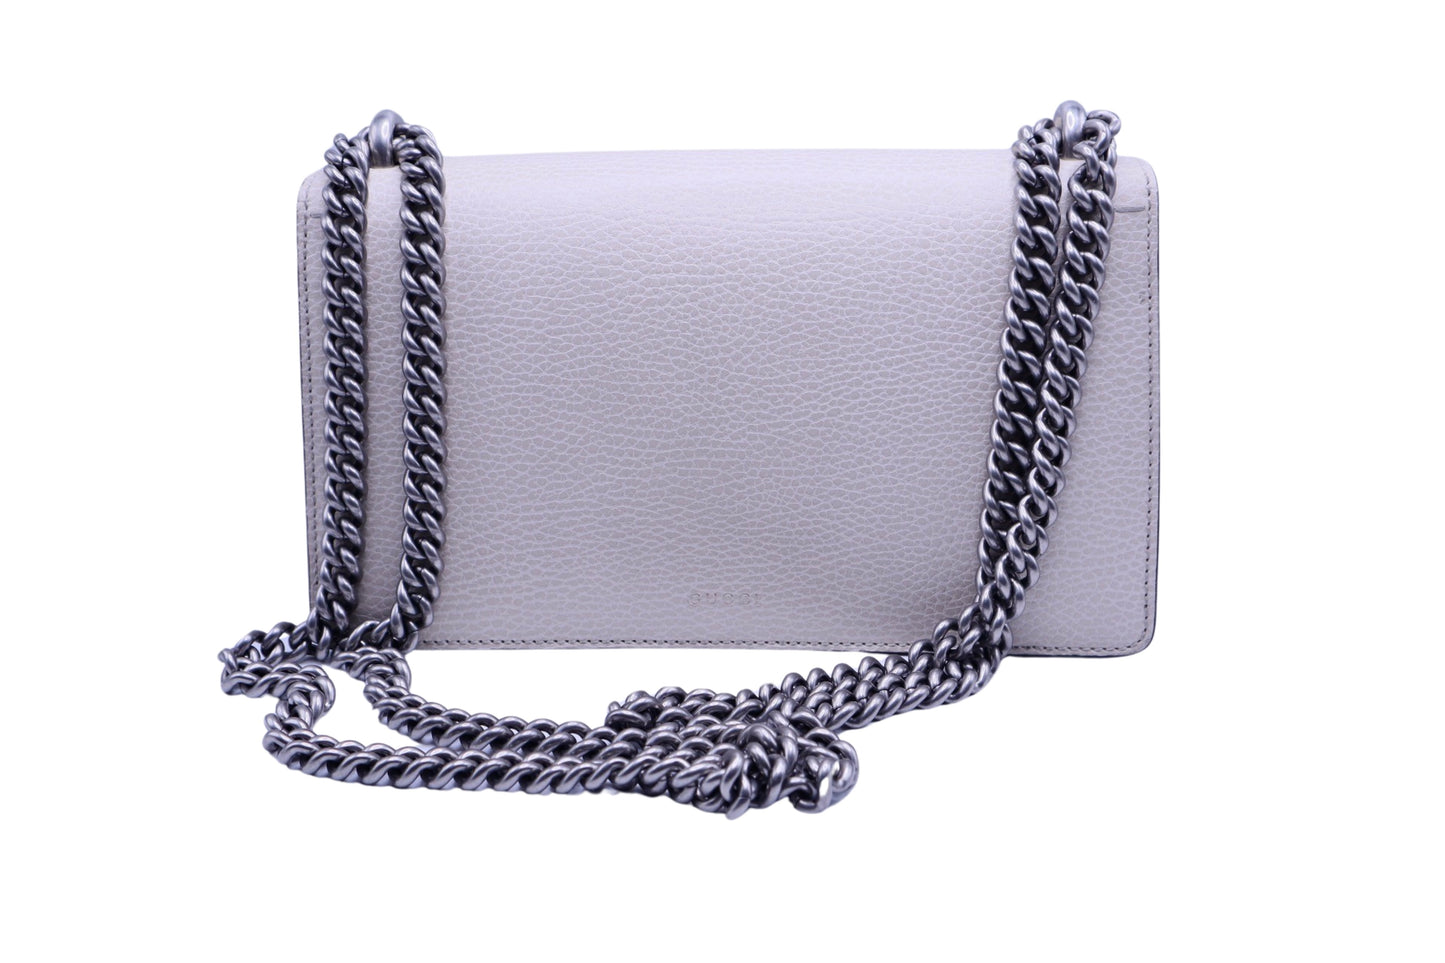 Back of white textured leather bag with silver adjustable chain